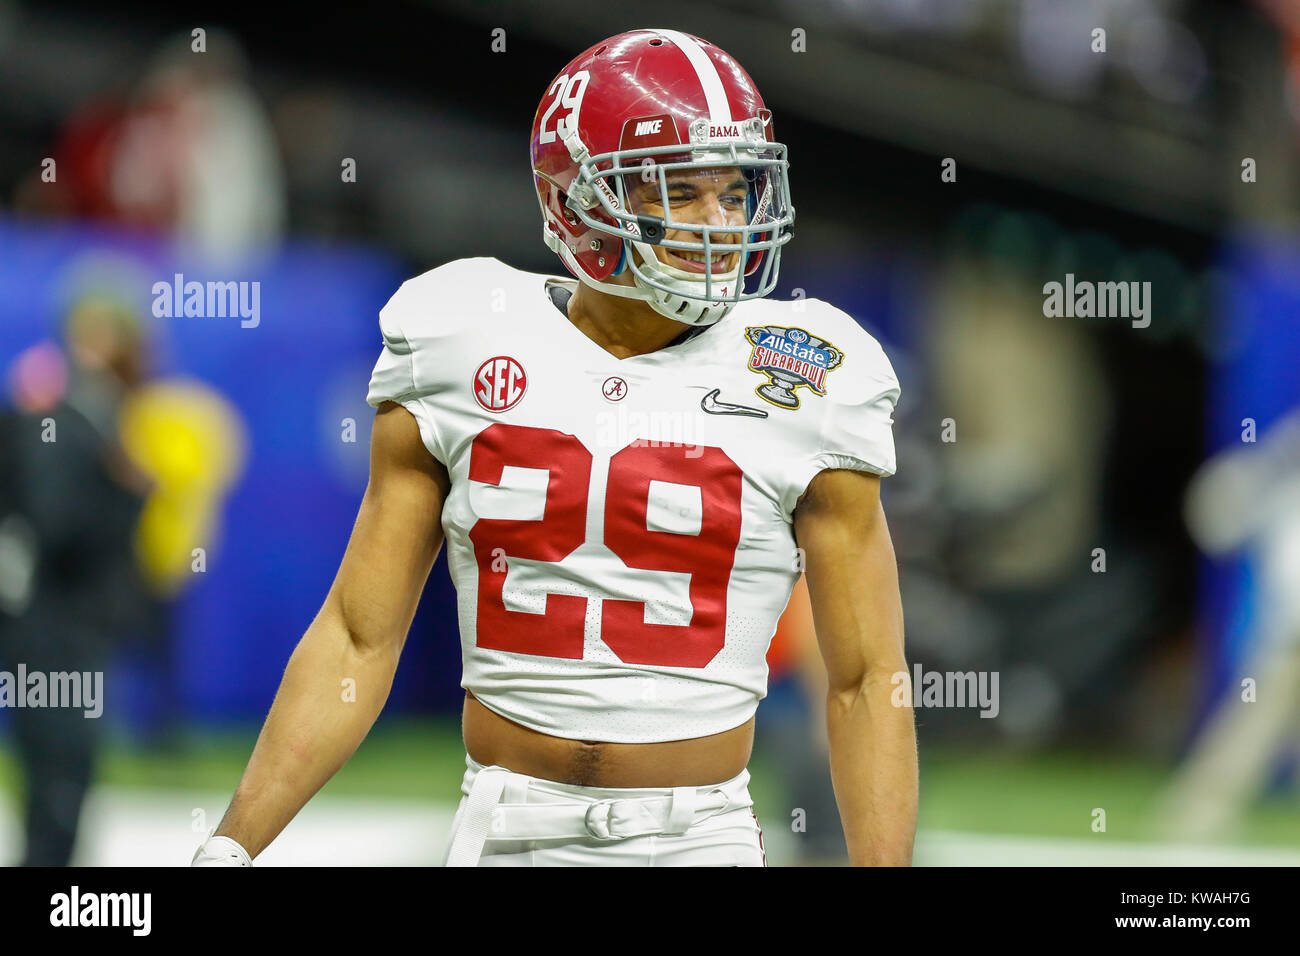 New Orleans, LA, USA. 1st Jan, 2018. Alabama DB Minkah Fitzpatcik #29 smiles during warm-ups prior to the Allstate Sugar Bowl football game between the Clemson Tigers and the Alabama Crimson Tide at the Mercedes-Benz Supedome in New Orleans, LA. Kyle Okita/CSM/Alamy Live News Stock Photo